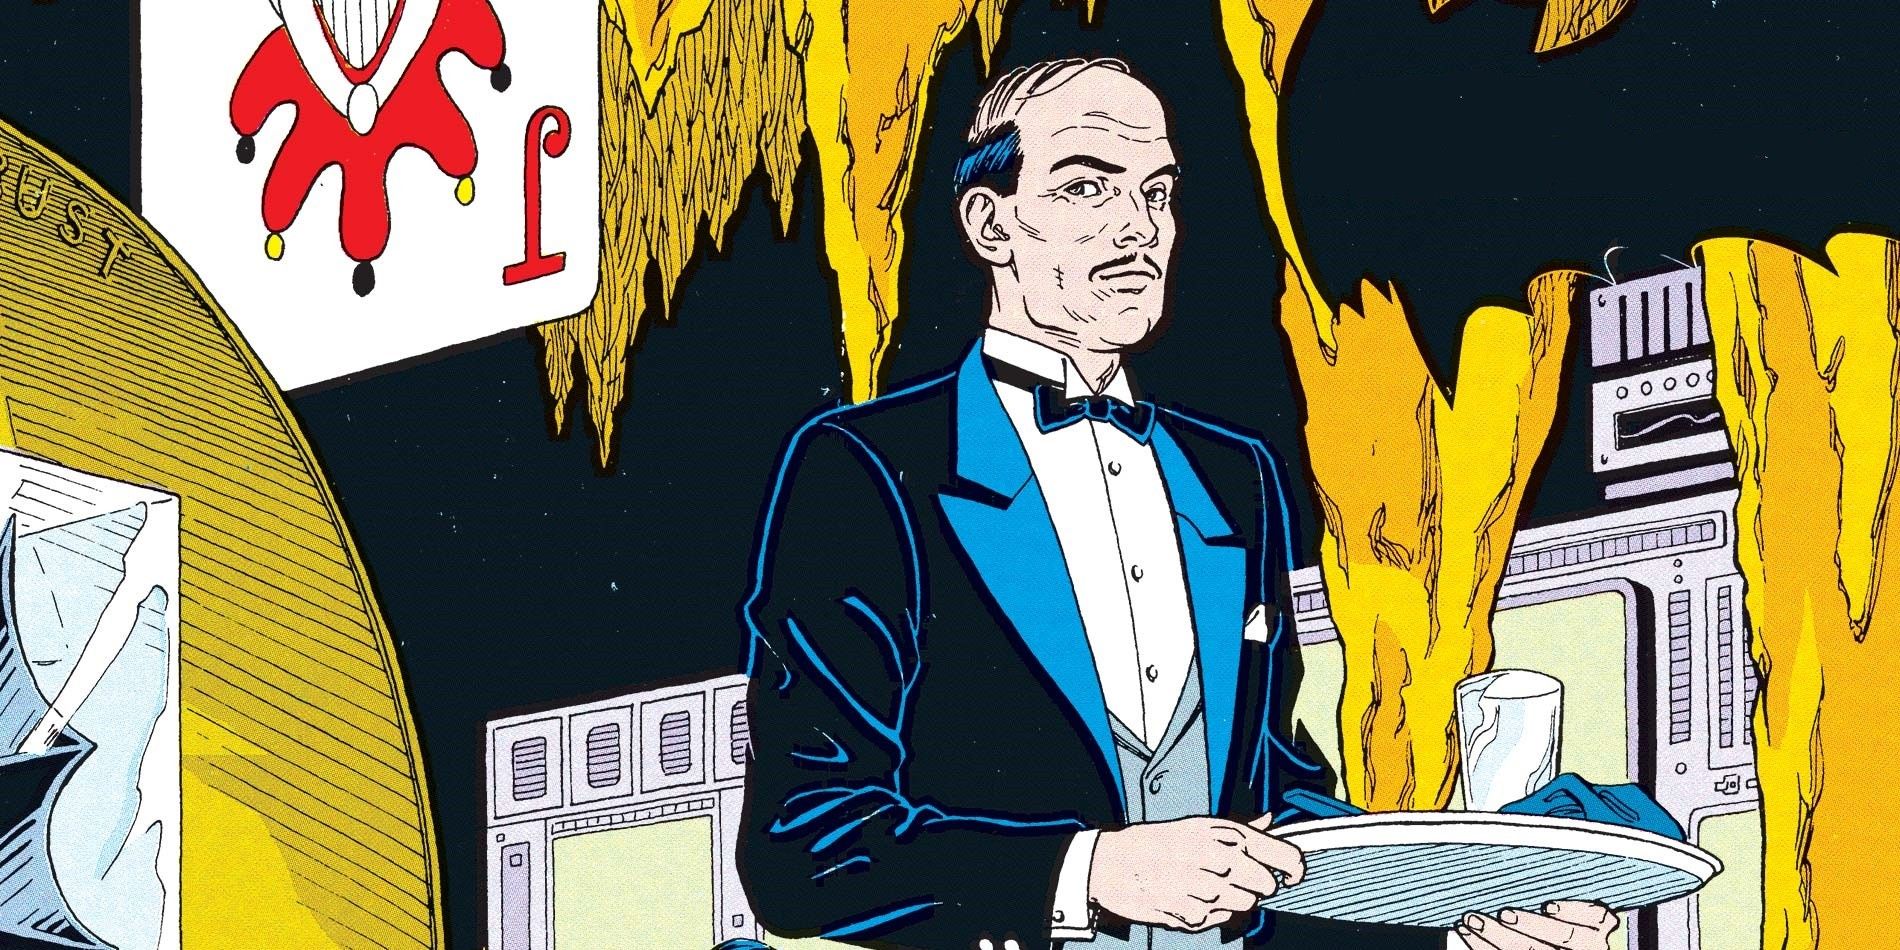 Alfred Pennyworth holds a tray while in the Batcave in Batman comics